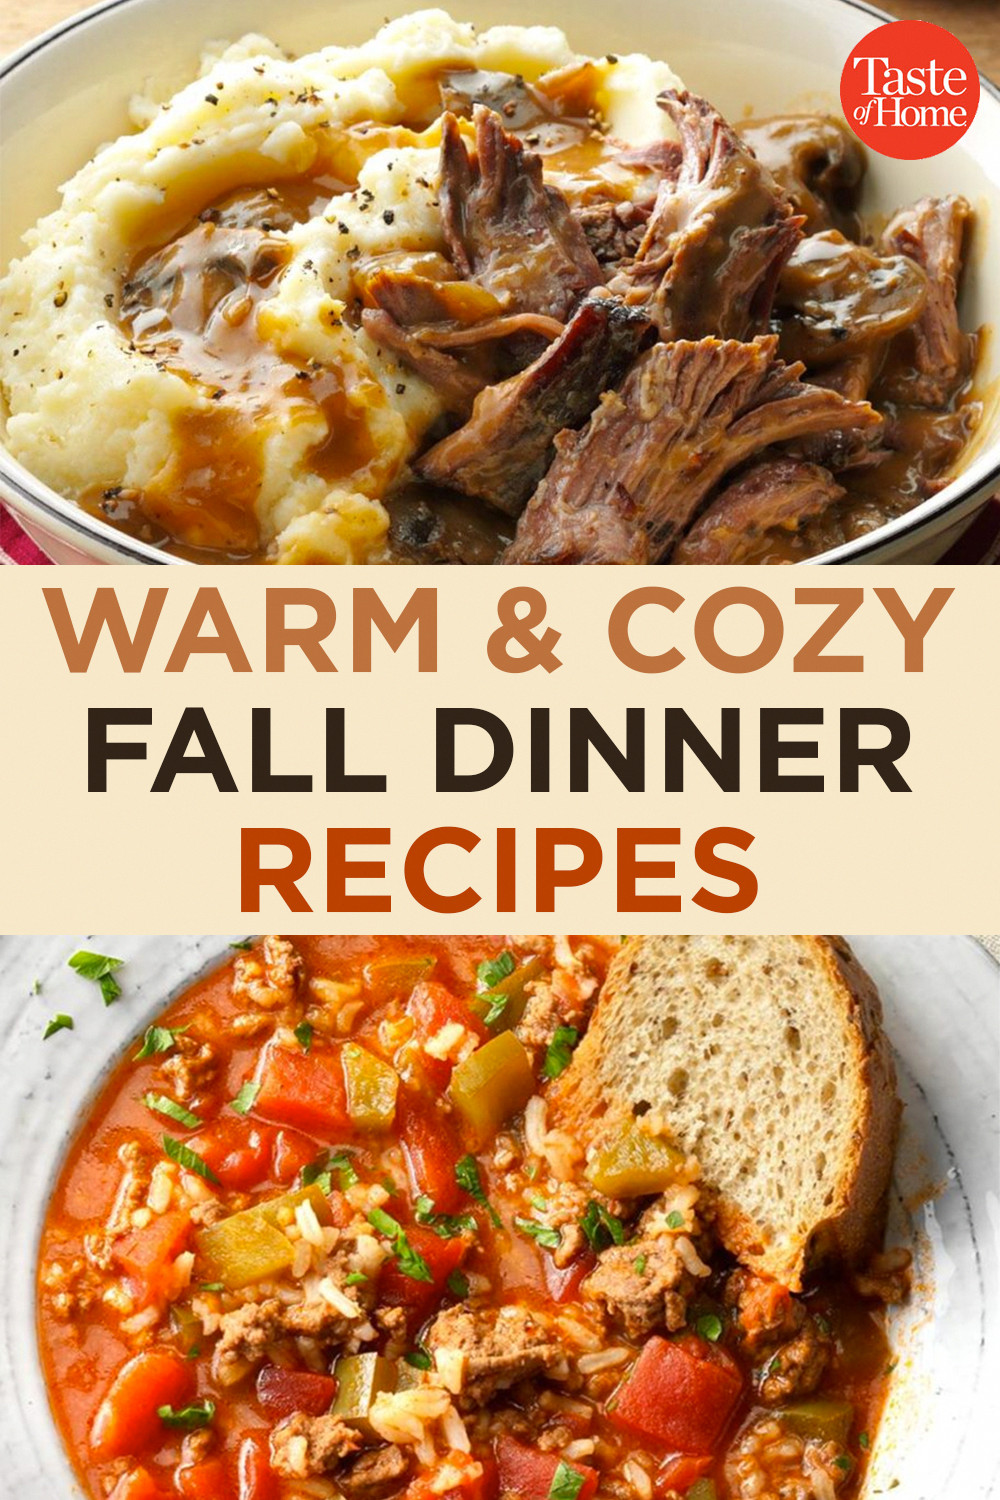 Healthy Fall Dinner Recipes
 Gain Weight if You Have Diabetes With images